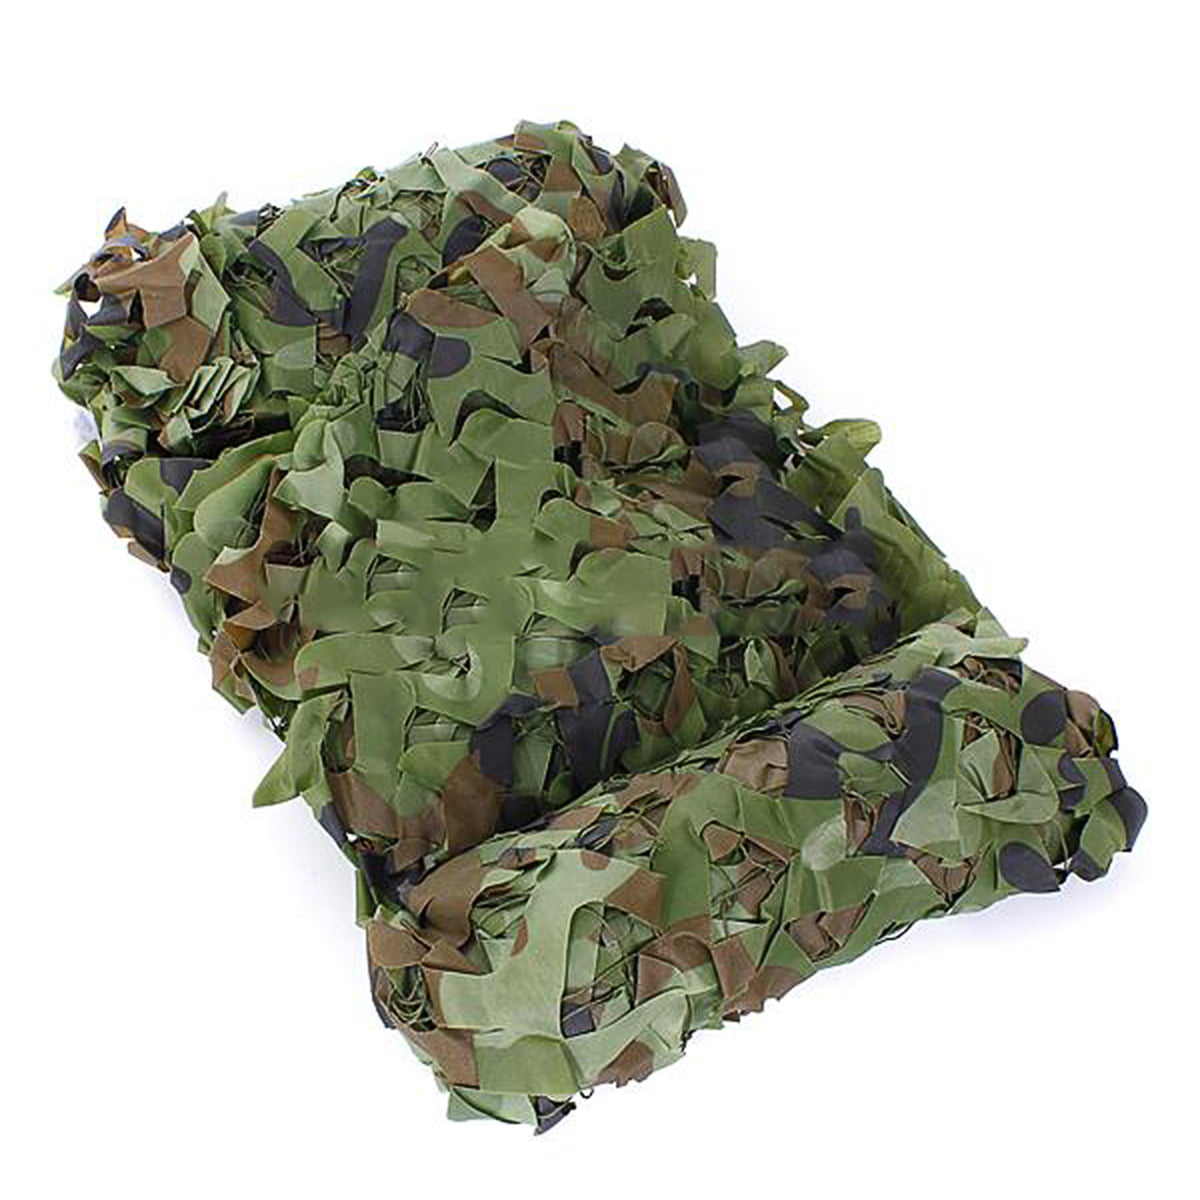 Details about   Shooting Hide Army Camouflage Net Hunting Camo Netting Woodland 5m x 1.5m